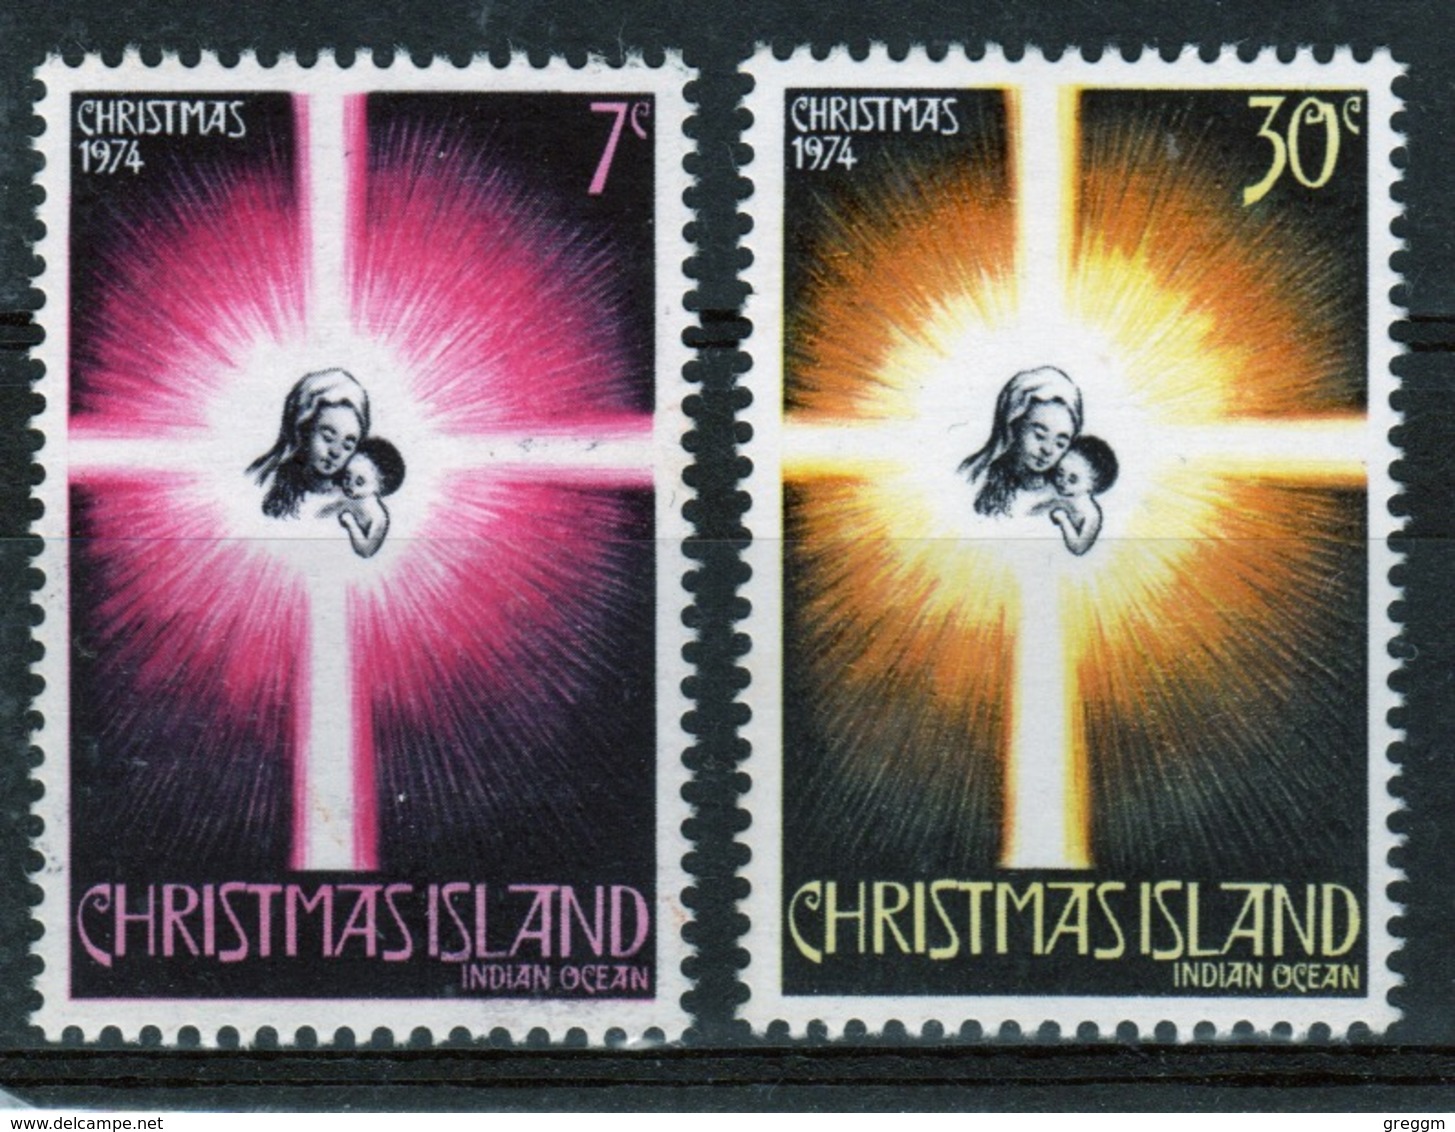 Christmas Island Set Of Stamps To Celebrate Christmas 1974. - Christmas Island